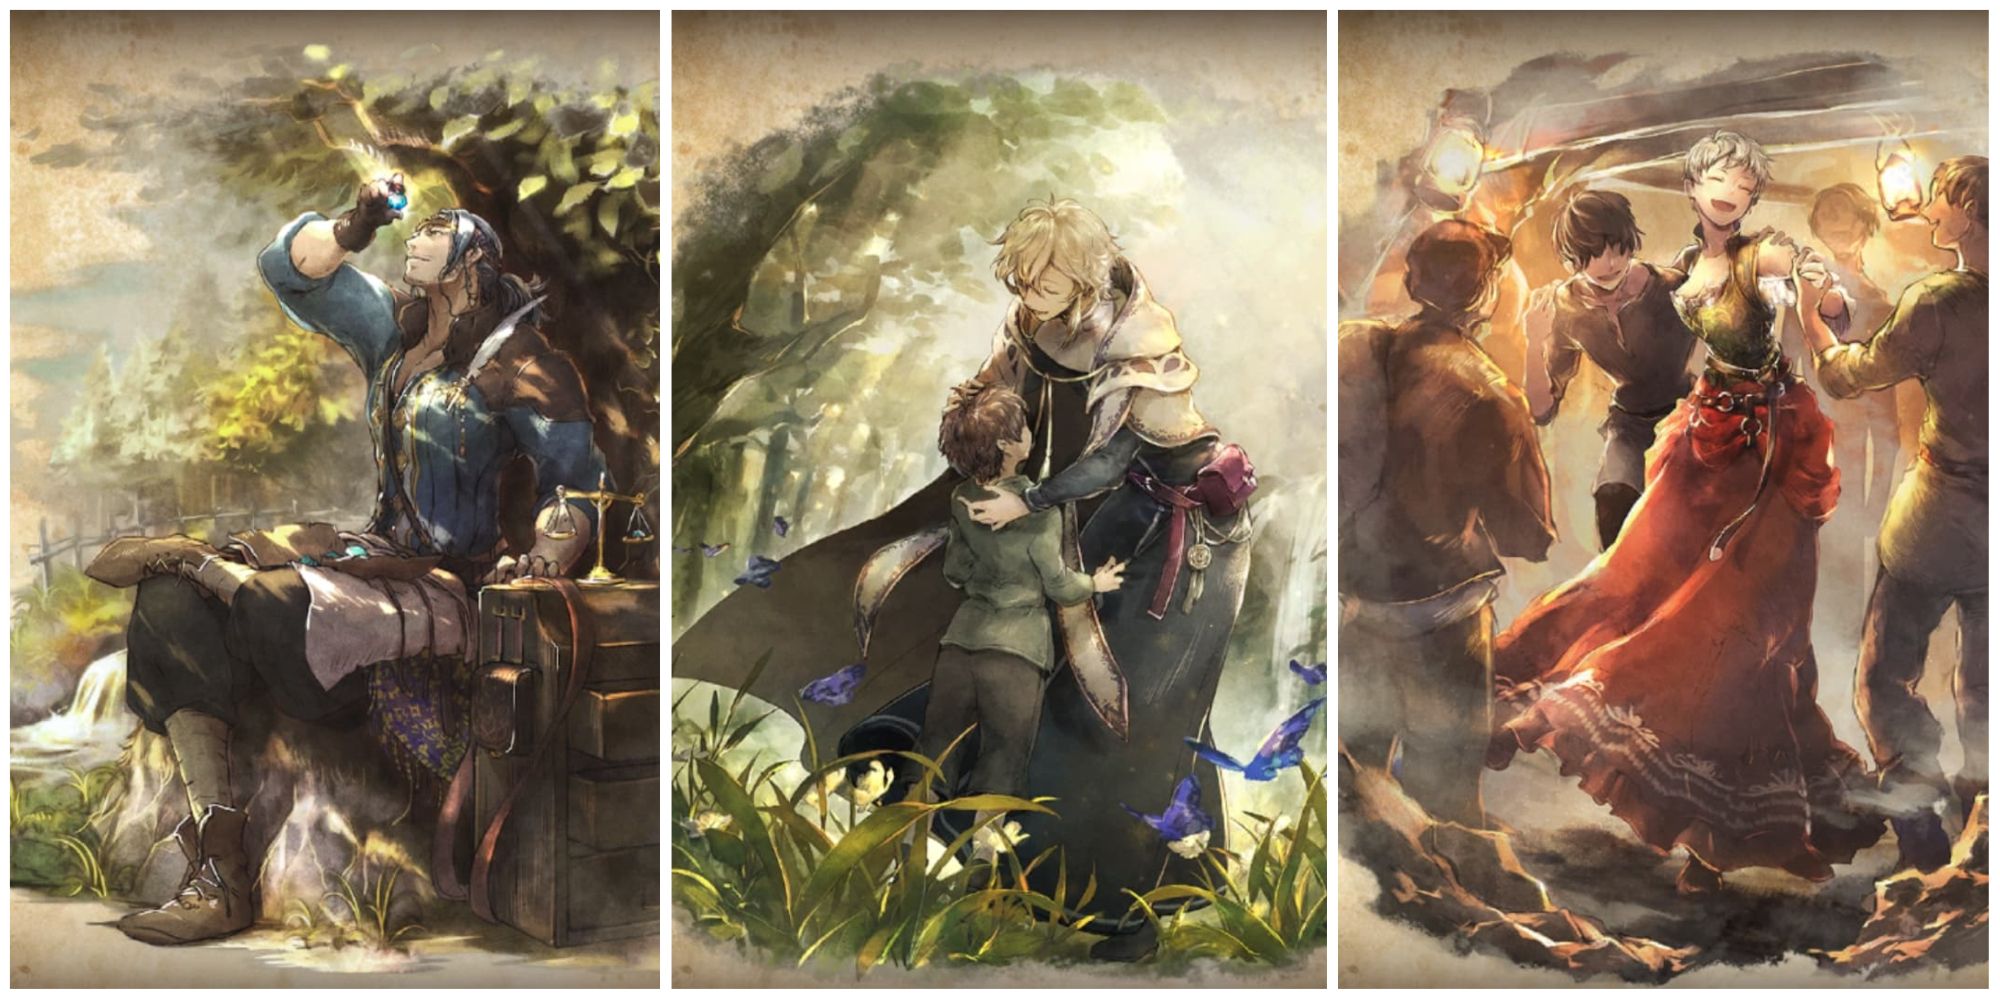 Octopath Traveler: Champions of the Continent